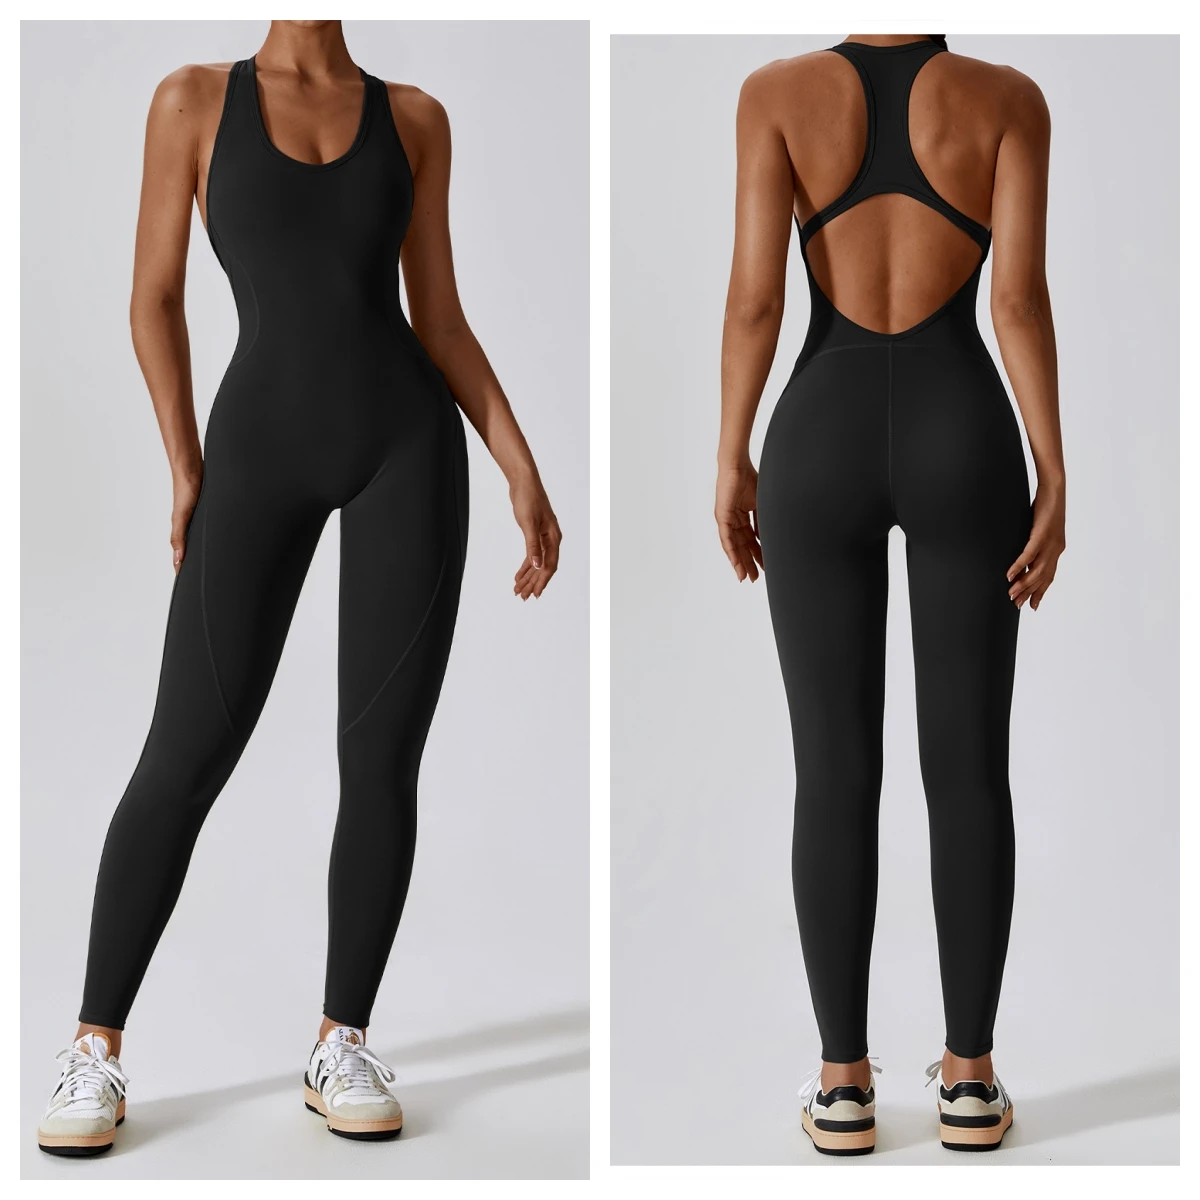 lulu Jumpsuits One-Piece Yoga Suit Dance Belly Tightening Fitness Workout Set Stretch Bodysuit Gym Clothes Push Up Sportswear